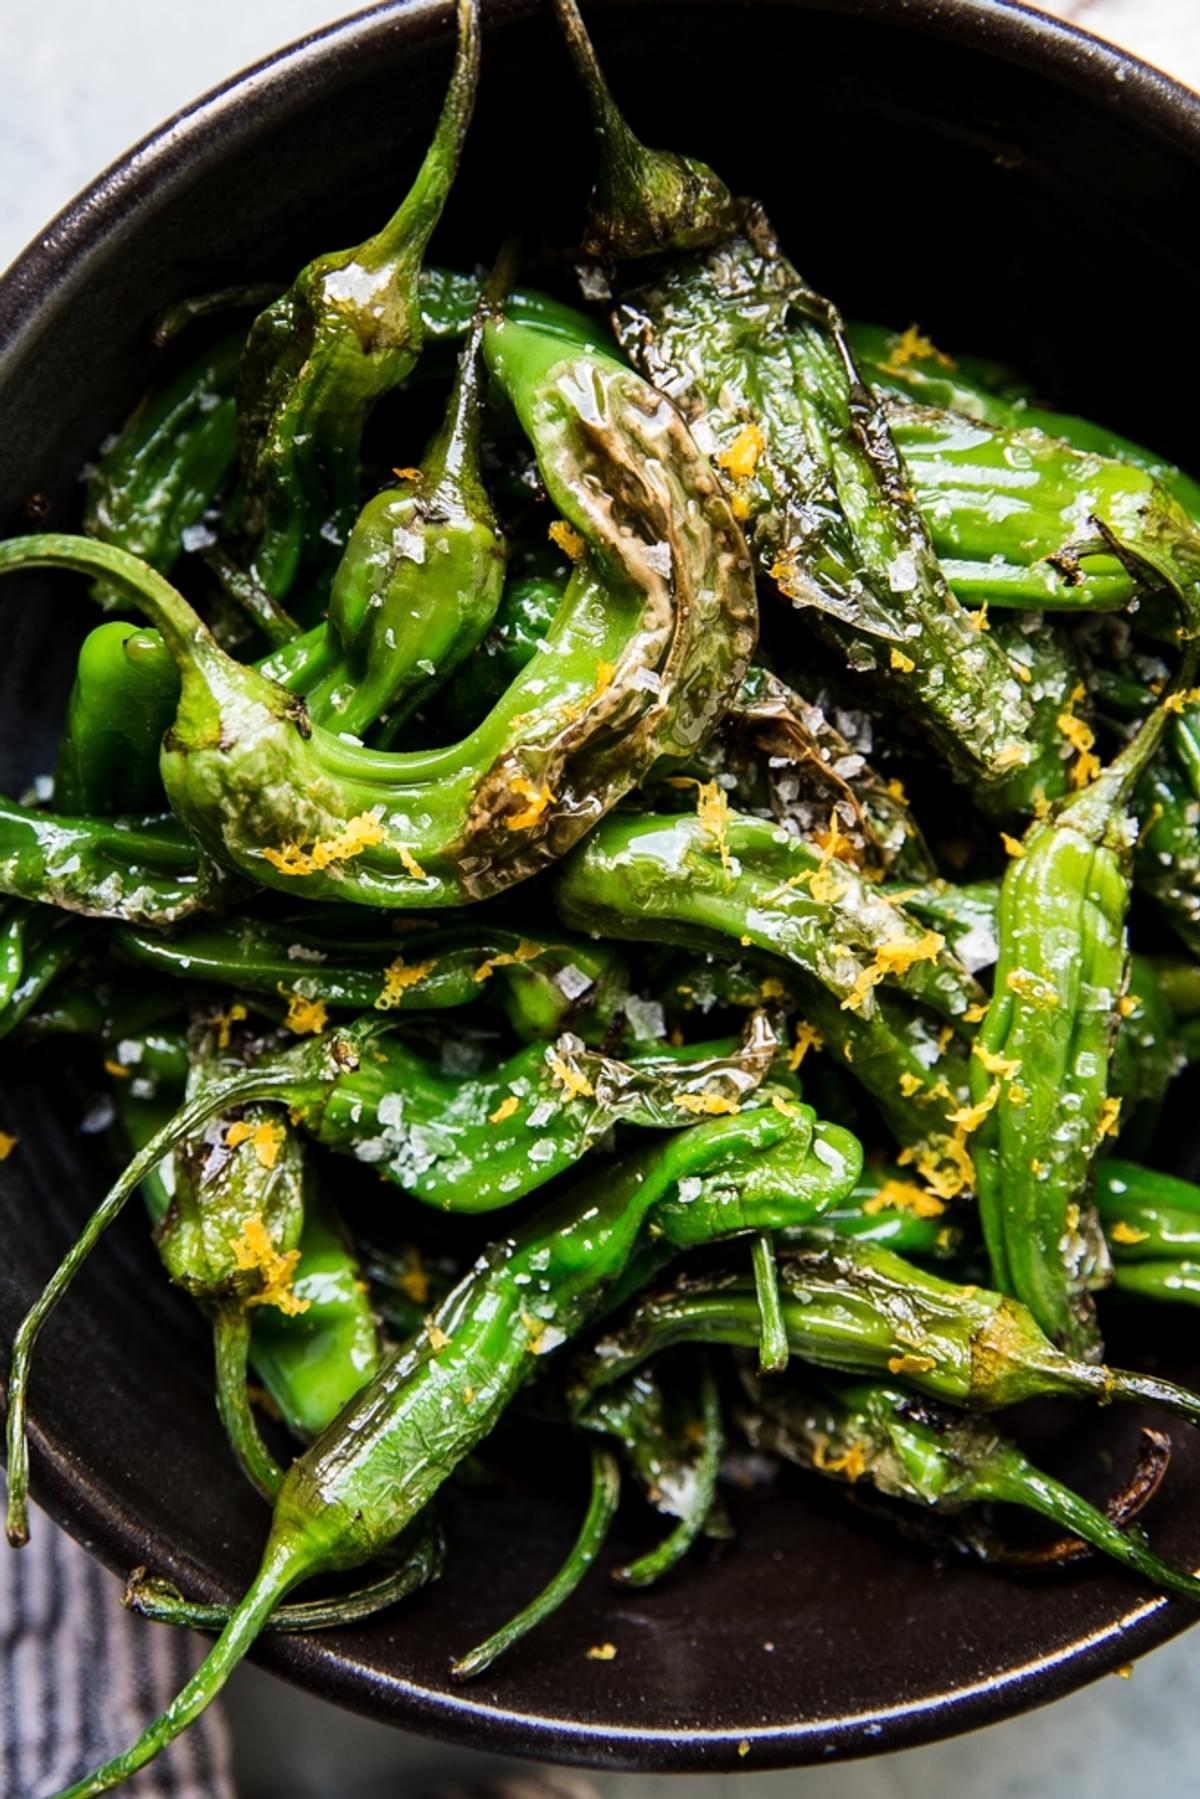 Blistered Shishito Peppers in olive oil, sea salt and lemon zest in a black bowl